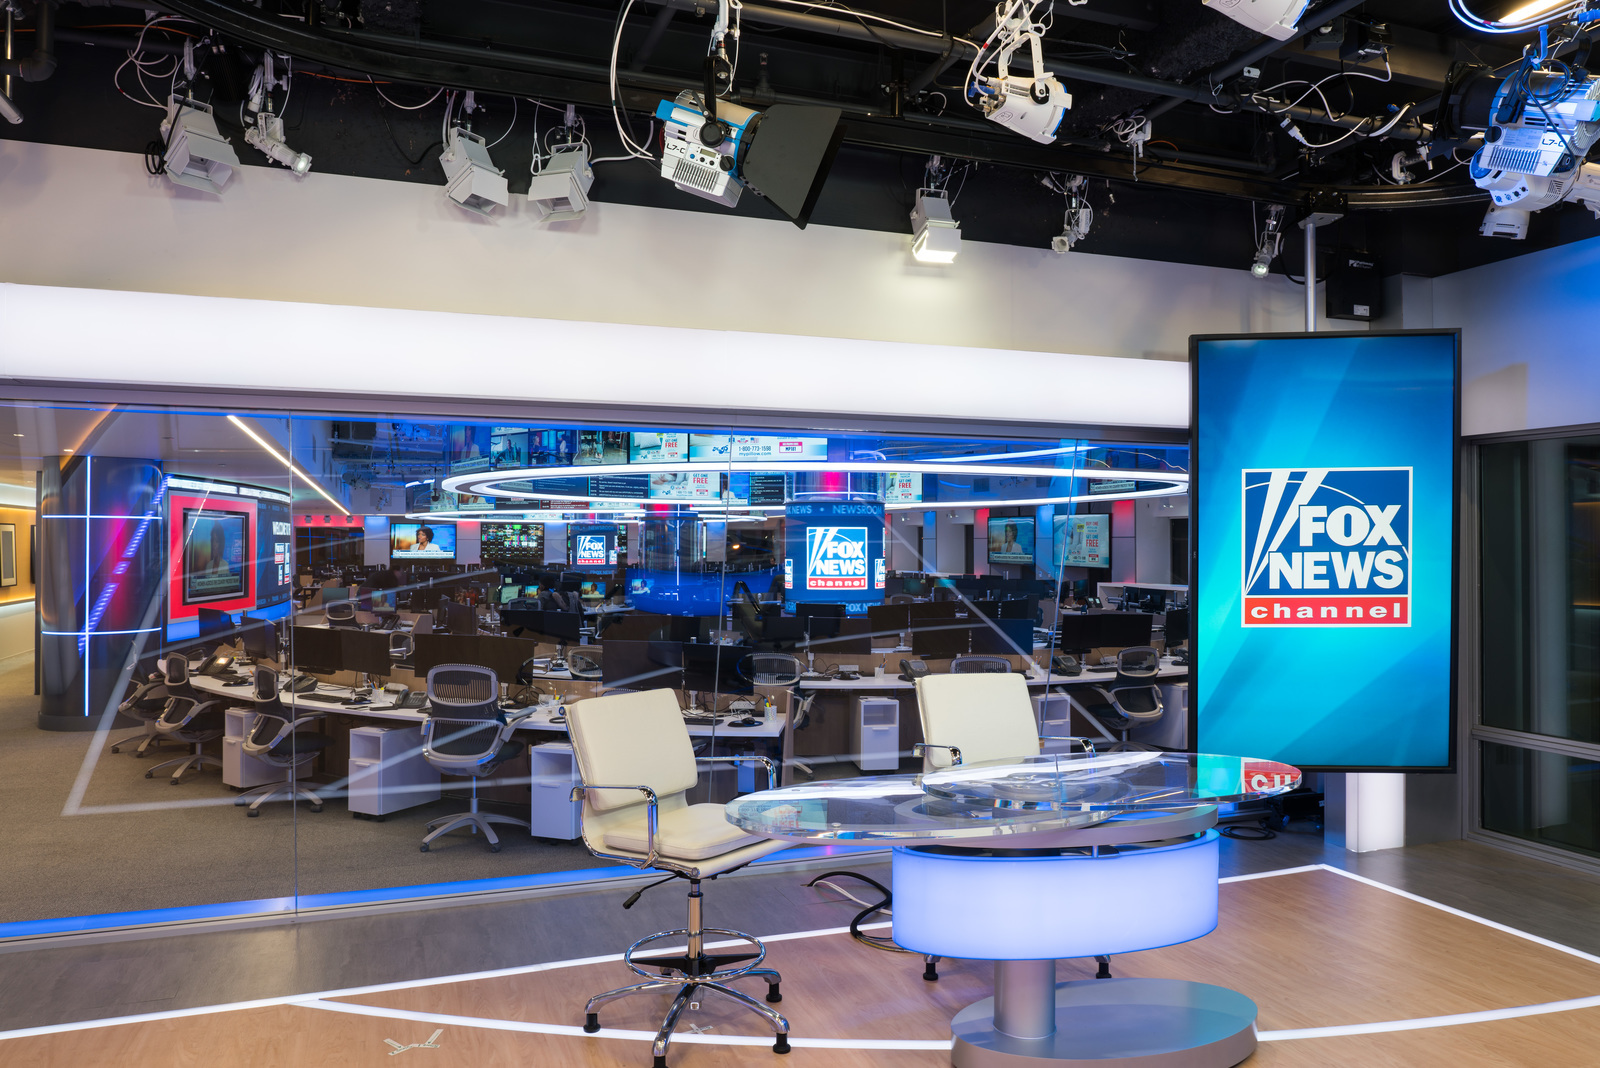 Mad and upset over Tucker Carlson?  Don't let go of Fox News Completely.  